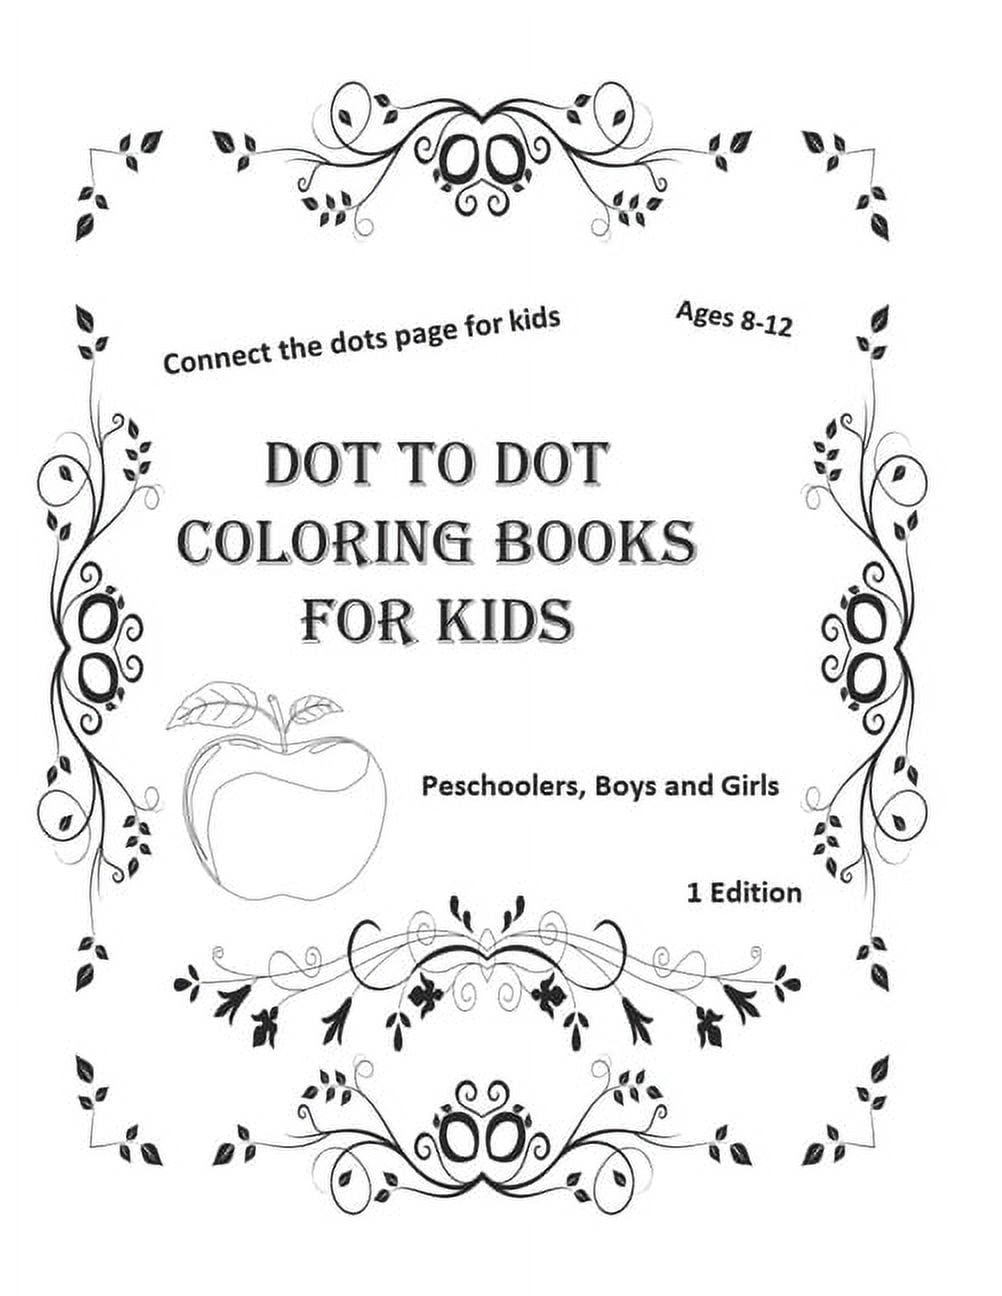 Dot to dot coloring books for kids ages 8-12: connect the dots